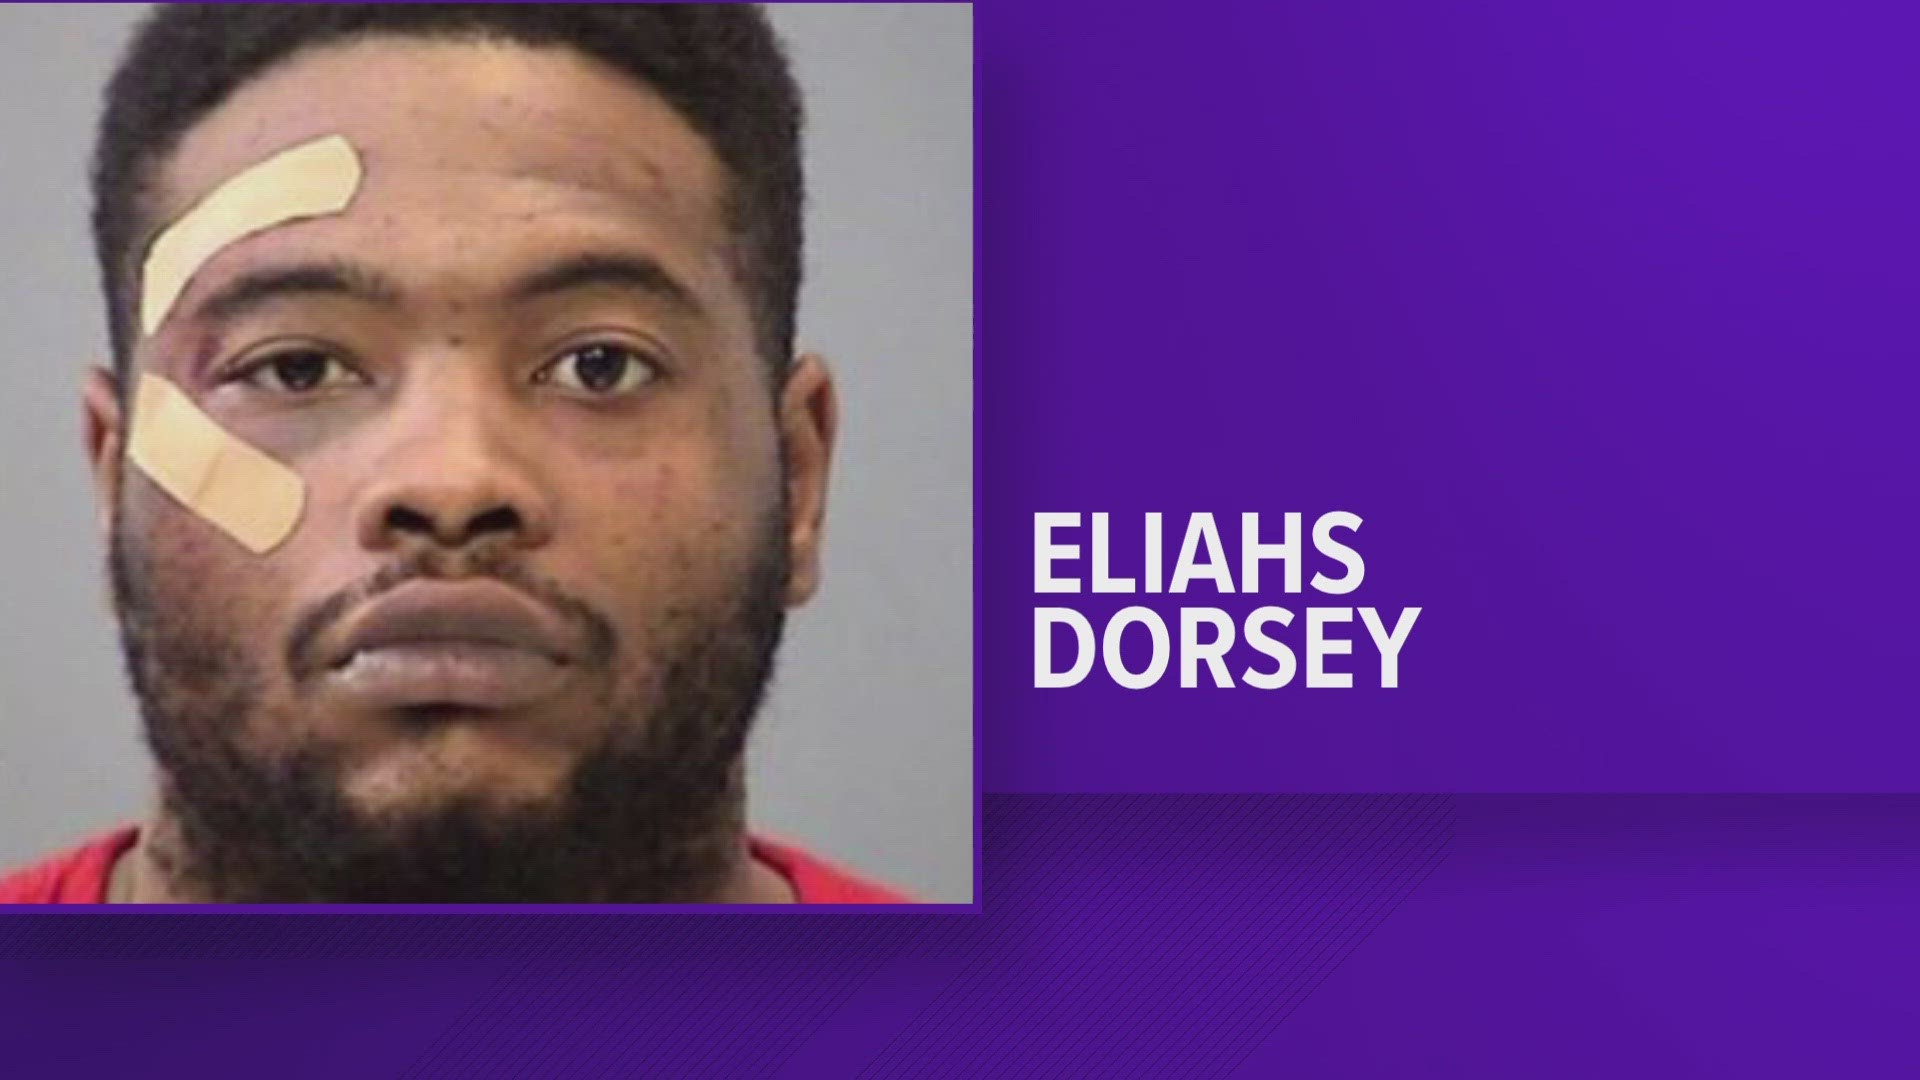 Elliahs Dorsey's attorneys notified the court of this plan just two weeks after the judge decided the state could seek the death penalty.